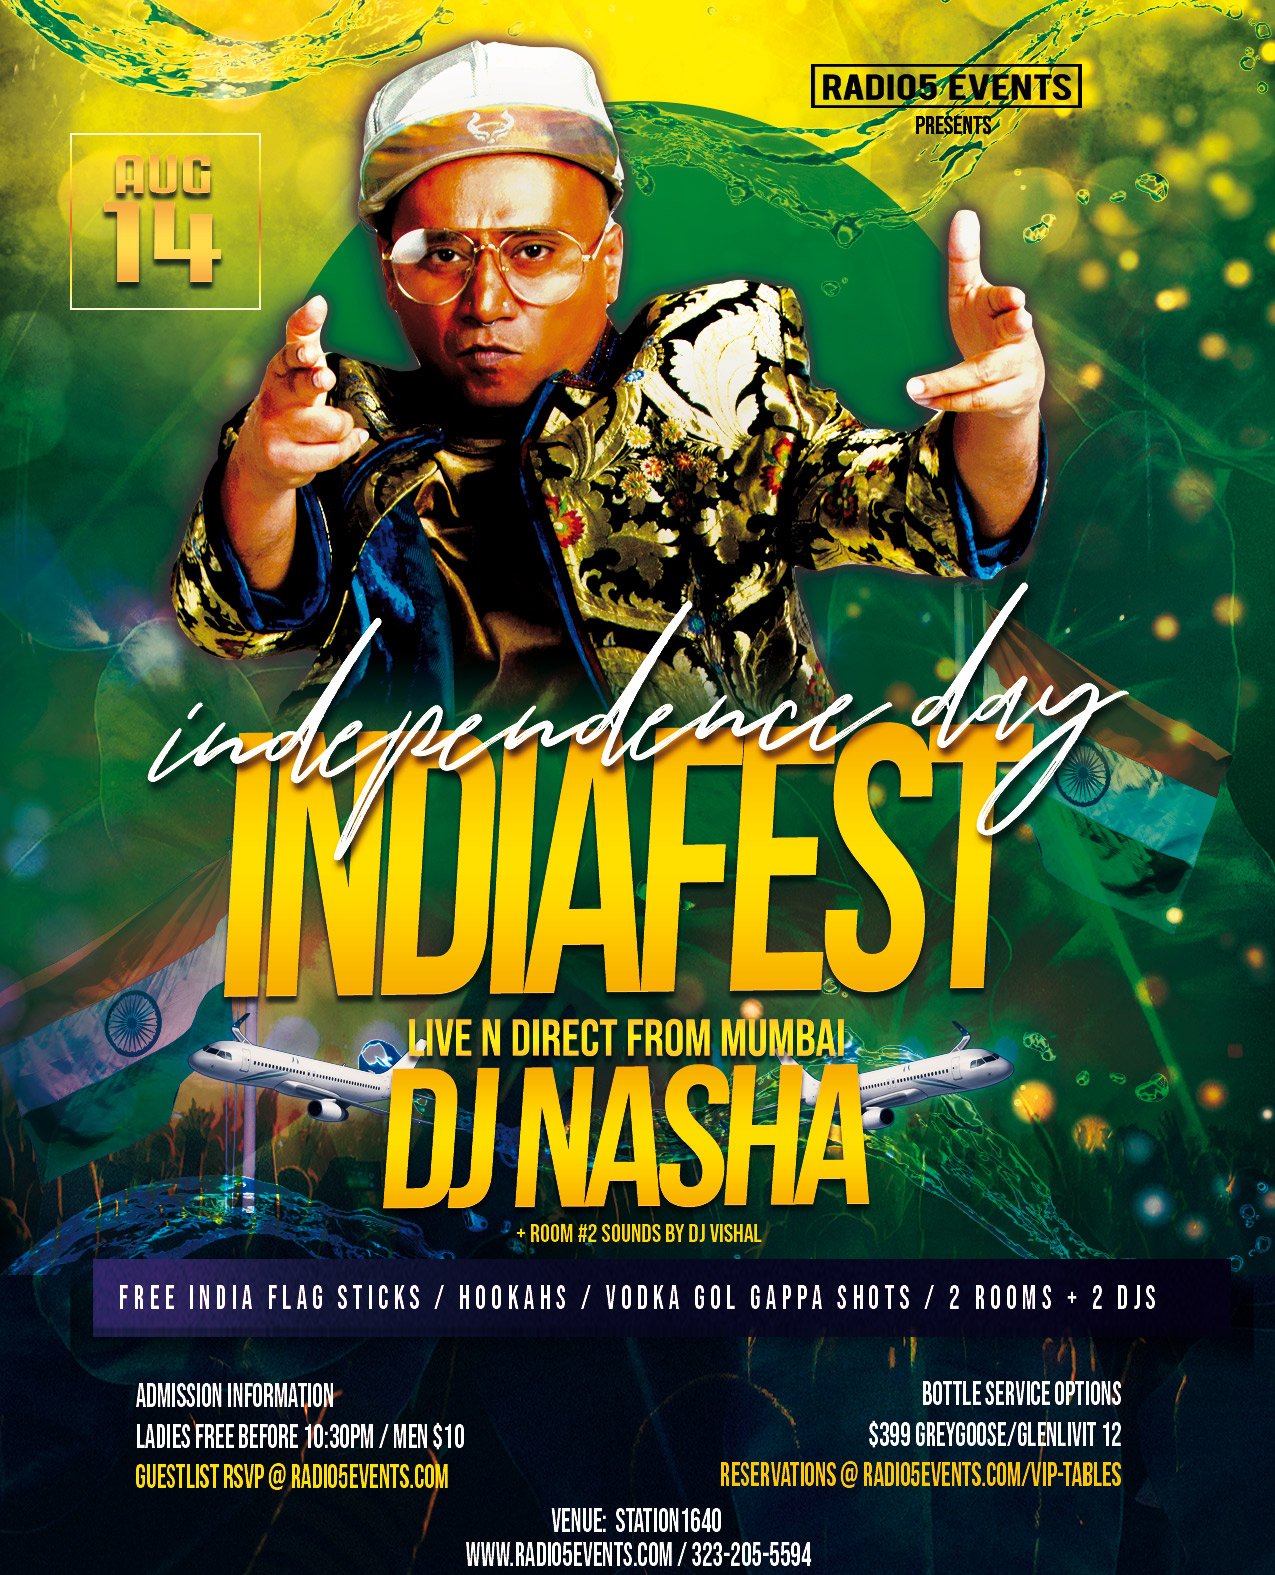 Radio5 Events presents, Indiafest 2021 - India's Independence Day Party in Hollywood with Mumbai's Celebrity DJ Nasha! 2 Rooms, 2 Deejays, Hookahs, Free India flagsticks + more!